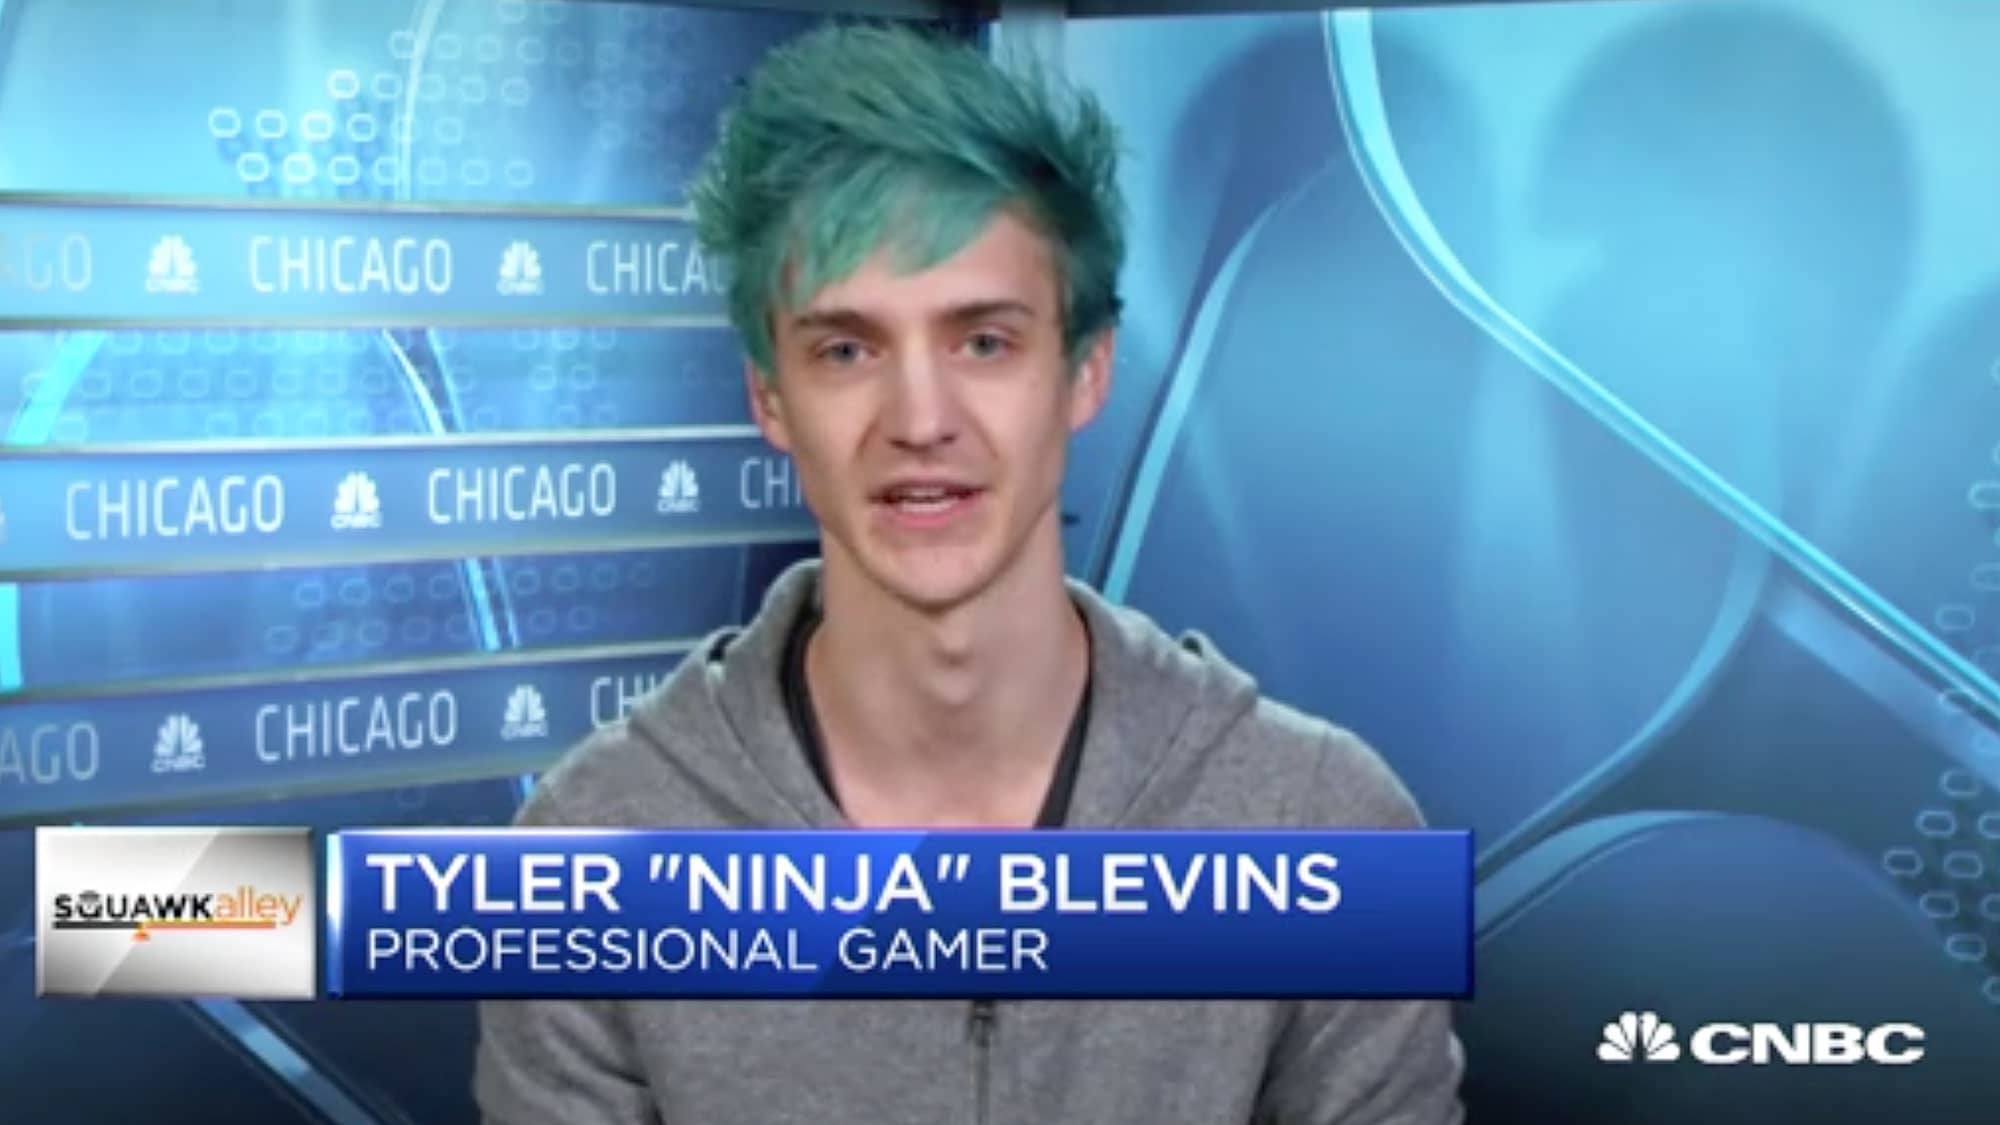 how much money does ninja make from ads on twitch